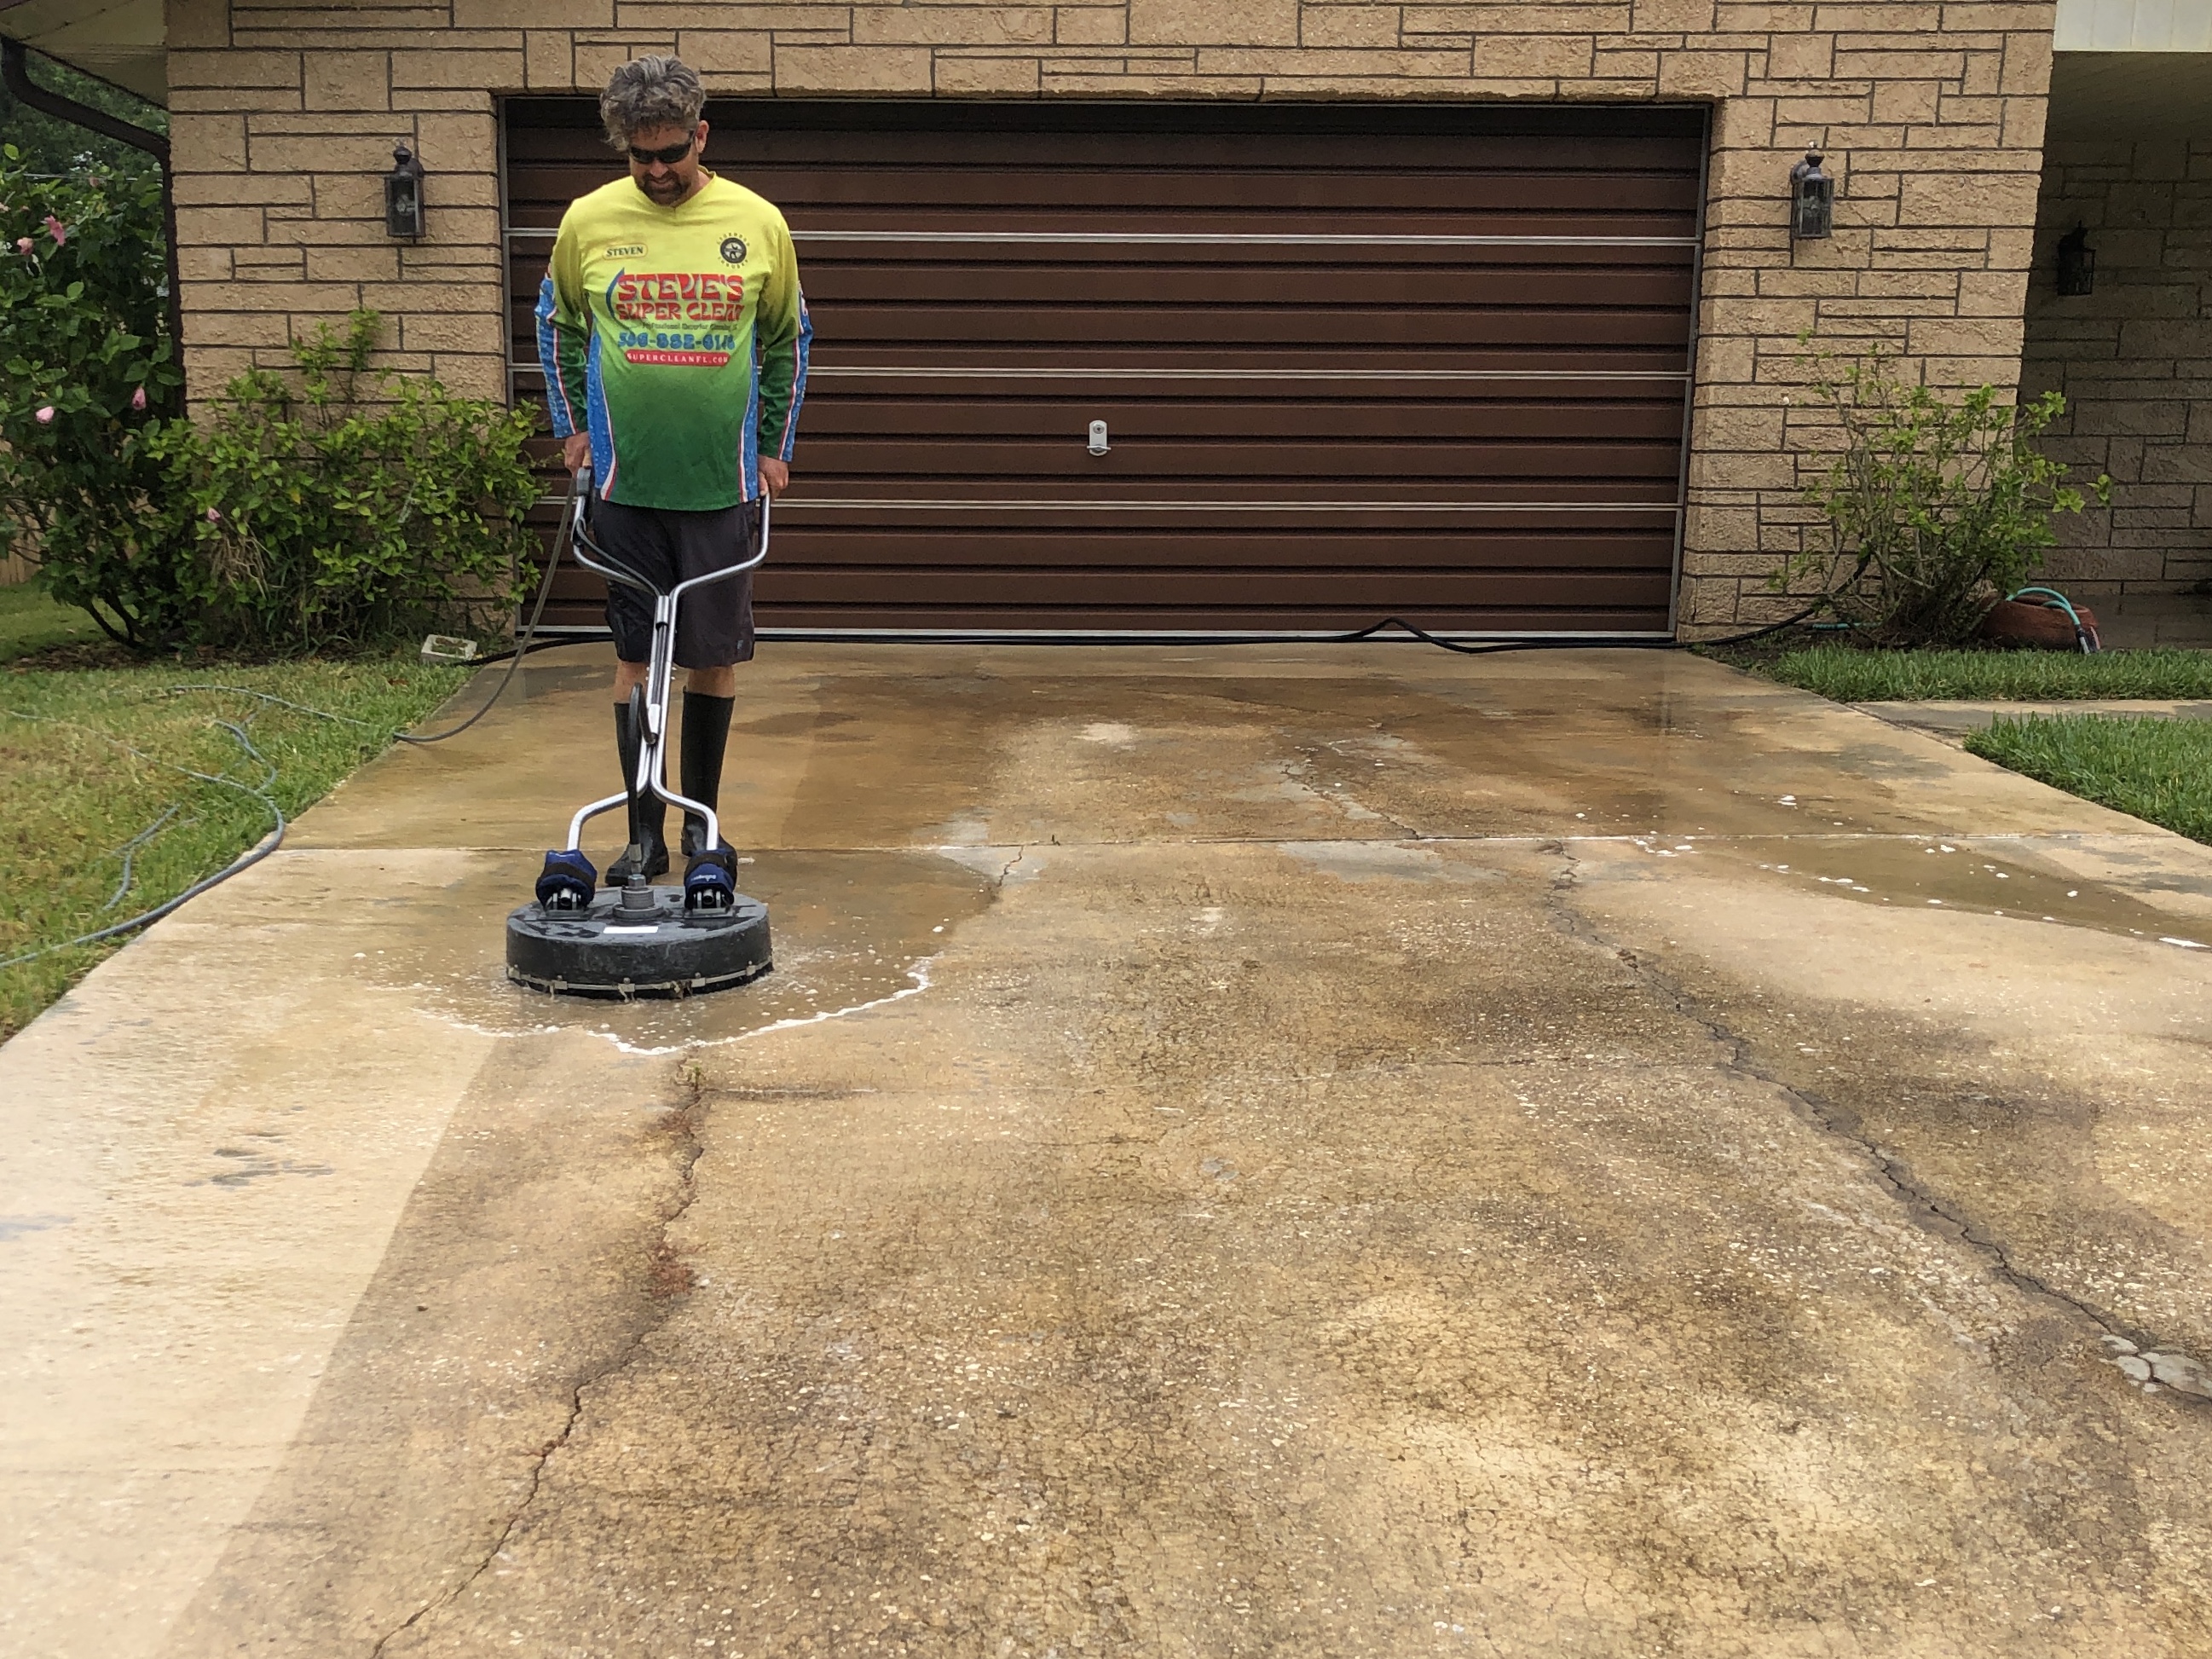 Transform Your Driveway with Steve's Super Clean Power Washing Services in South Daytona, FL and Surrounding Areas